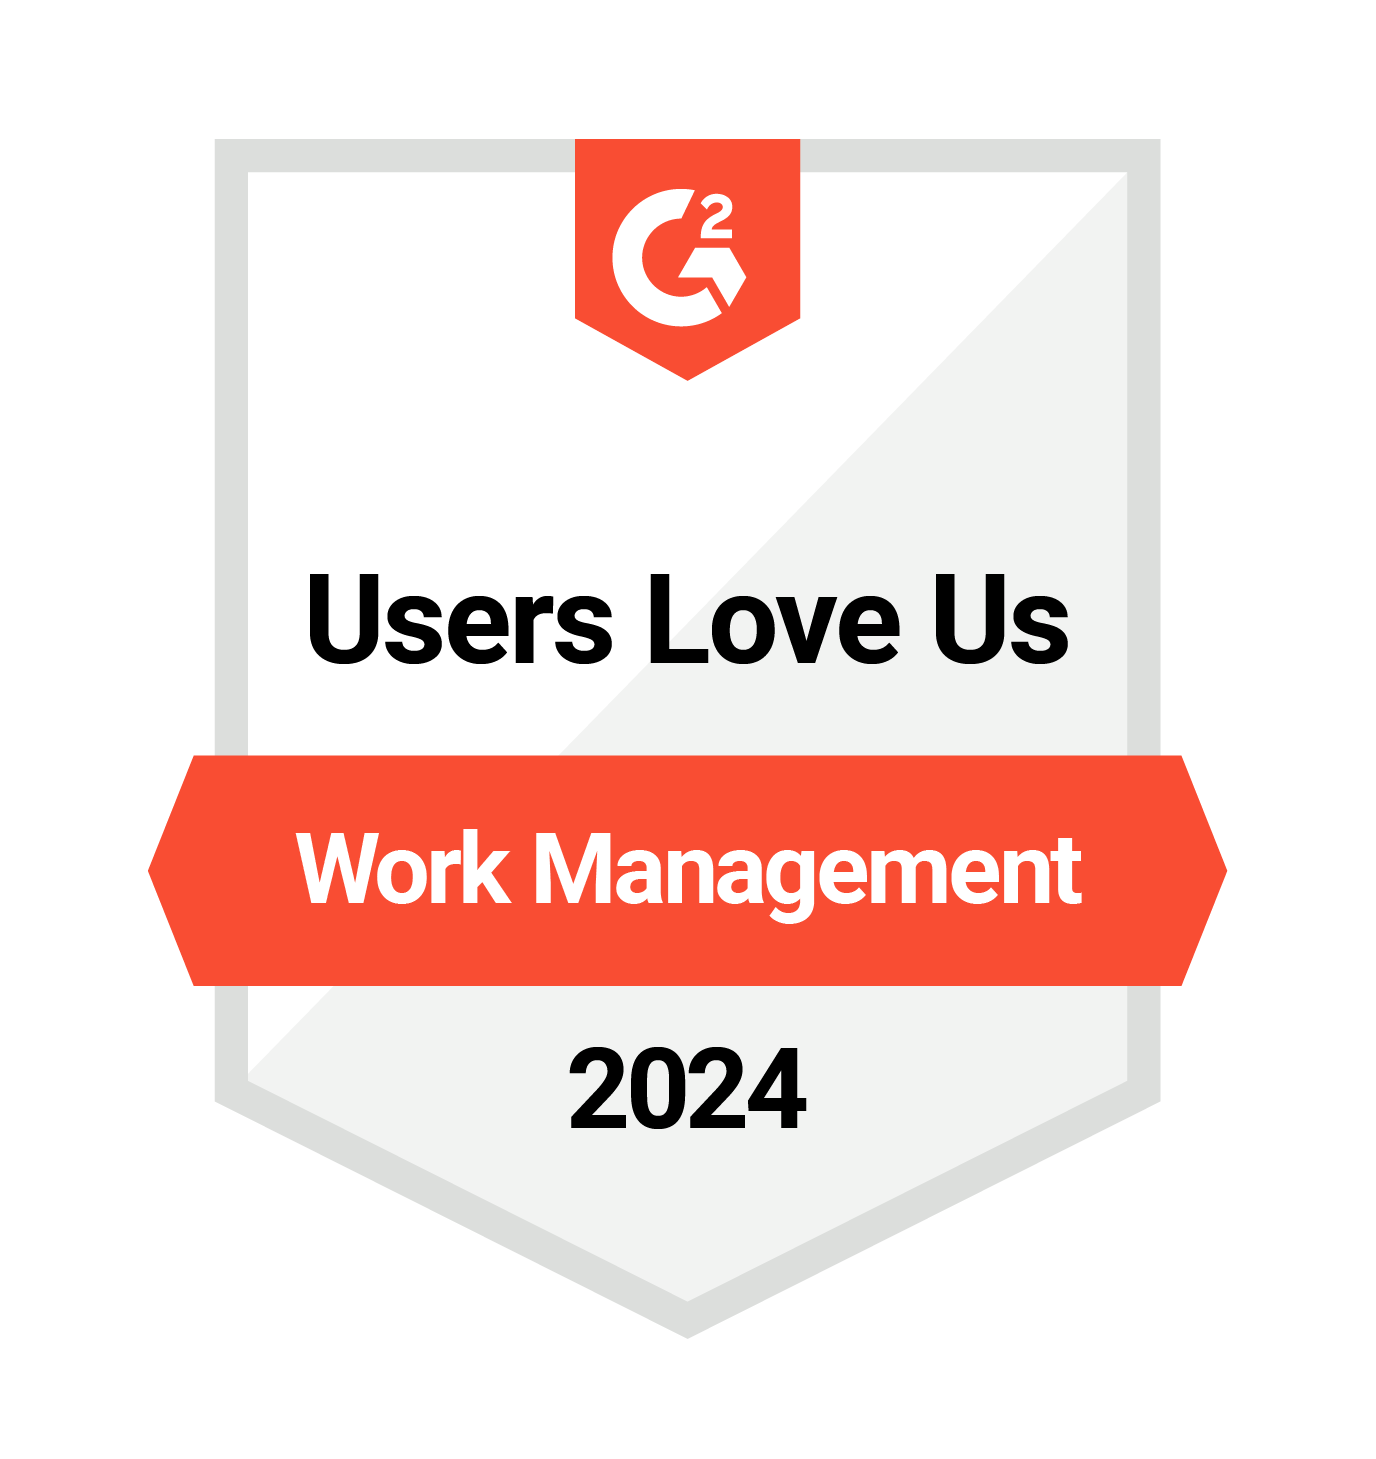 G2 Users Love Us in Work Management